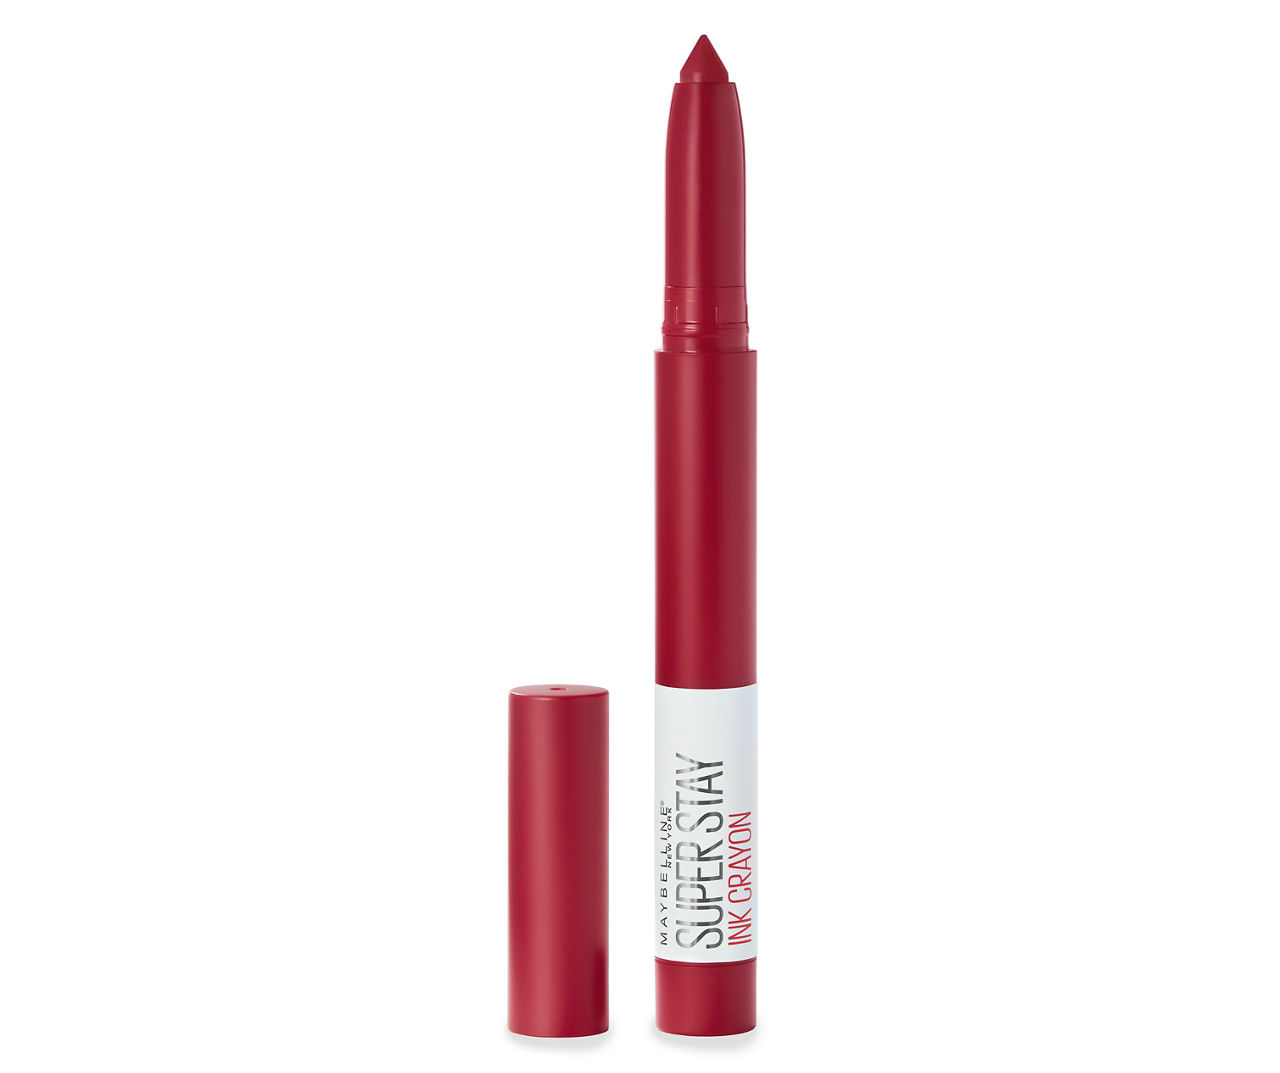 Superstay Ink Crayon Lipstick in Own Your Empire